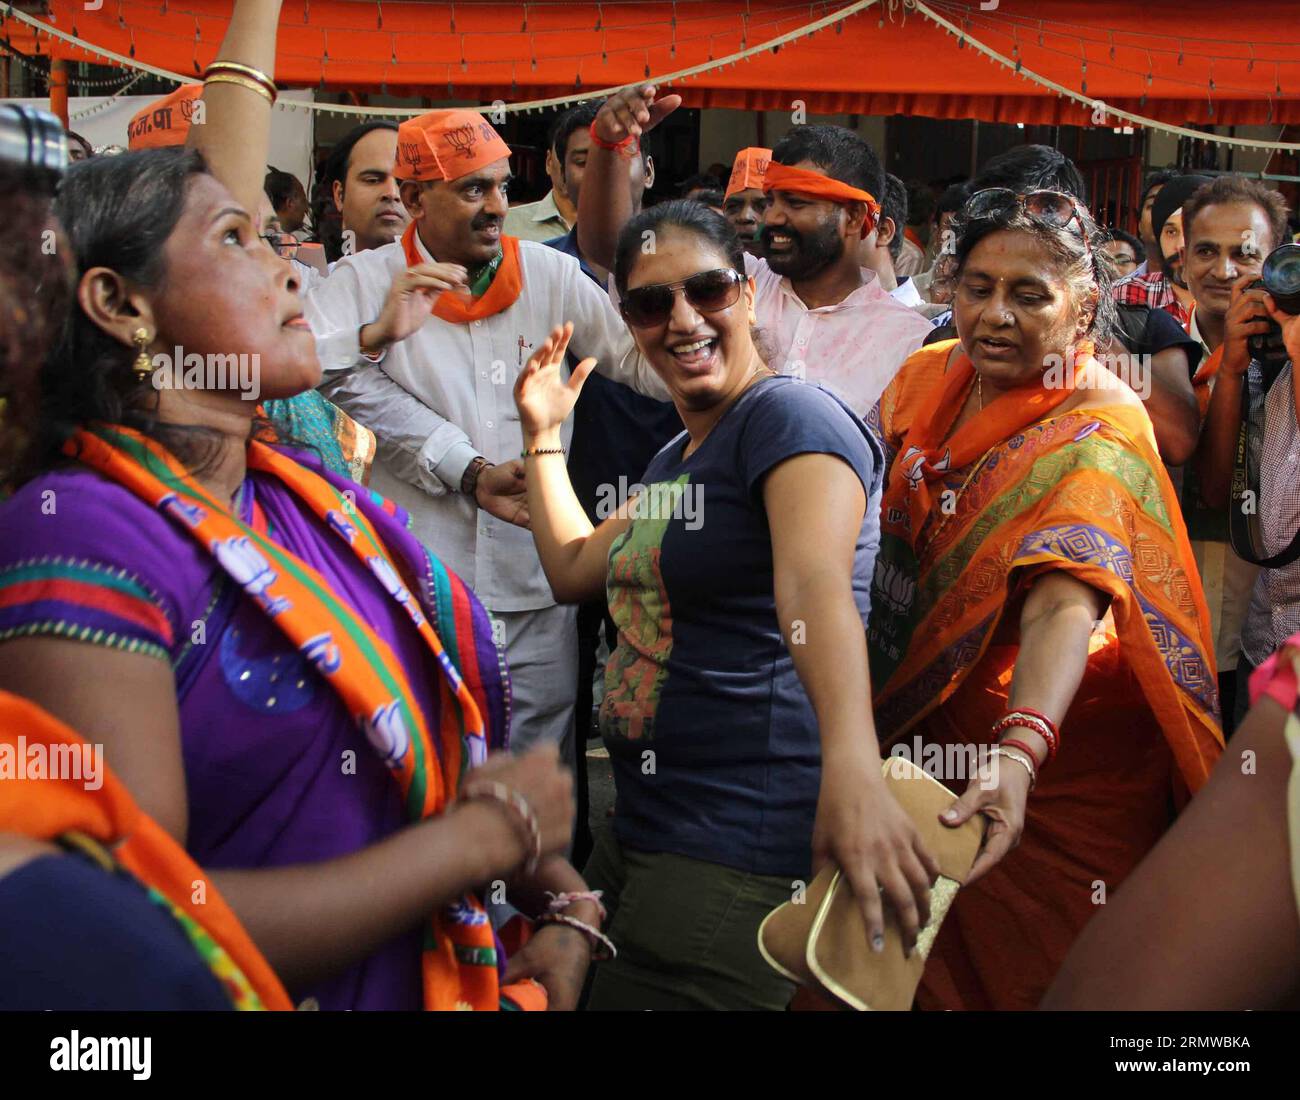 (141019) -- MUMBAI, Oct. 19, 2014 -- Supporters of India s ruling Bharatiya Janata Party (BJP) celebrate as early results indicated the party leading in the Maharashtra state assembly elections in Mumbai, India, Oct. 19, 2014. India s ruling Bharatiya Janata Party (BJP) has won control of the country s financial capital Mumbai through a legislative election in the state of Maharashtra, while also grasping the northern state of Haryana from the Congress, said vote counting results Sunday. ) INDIA-MUMBAI-BJP-CELEBRATION Stringer PUBLICATIONxNOTxINxCHN   Mumbai OCT 19 2014 Supporters of India S r Stock Photo